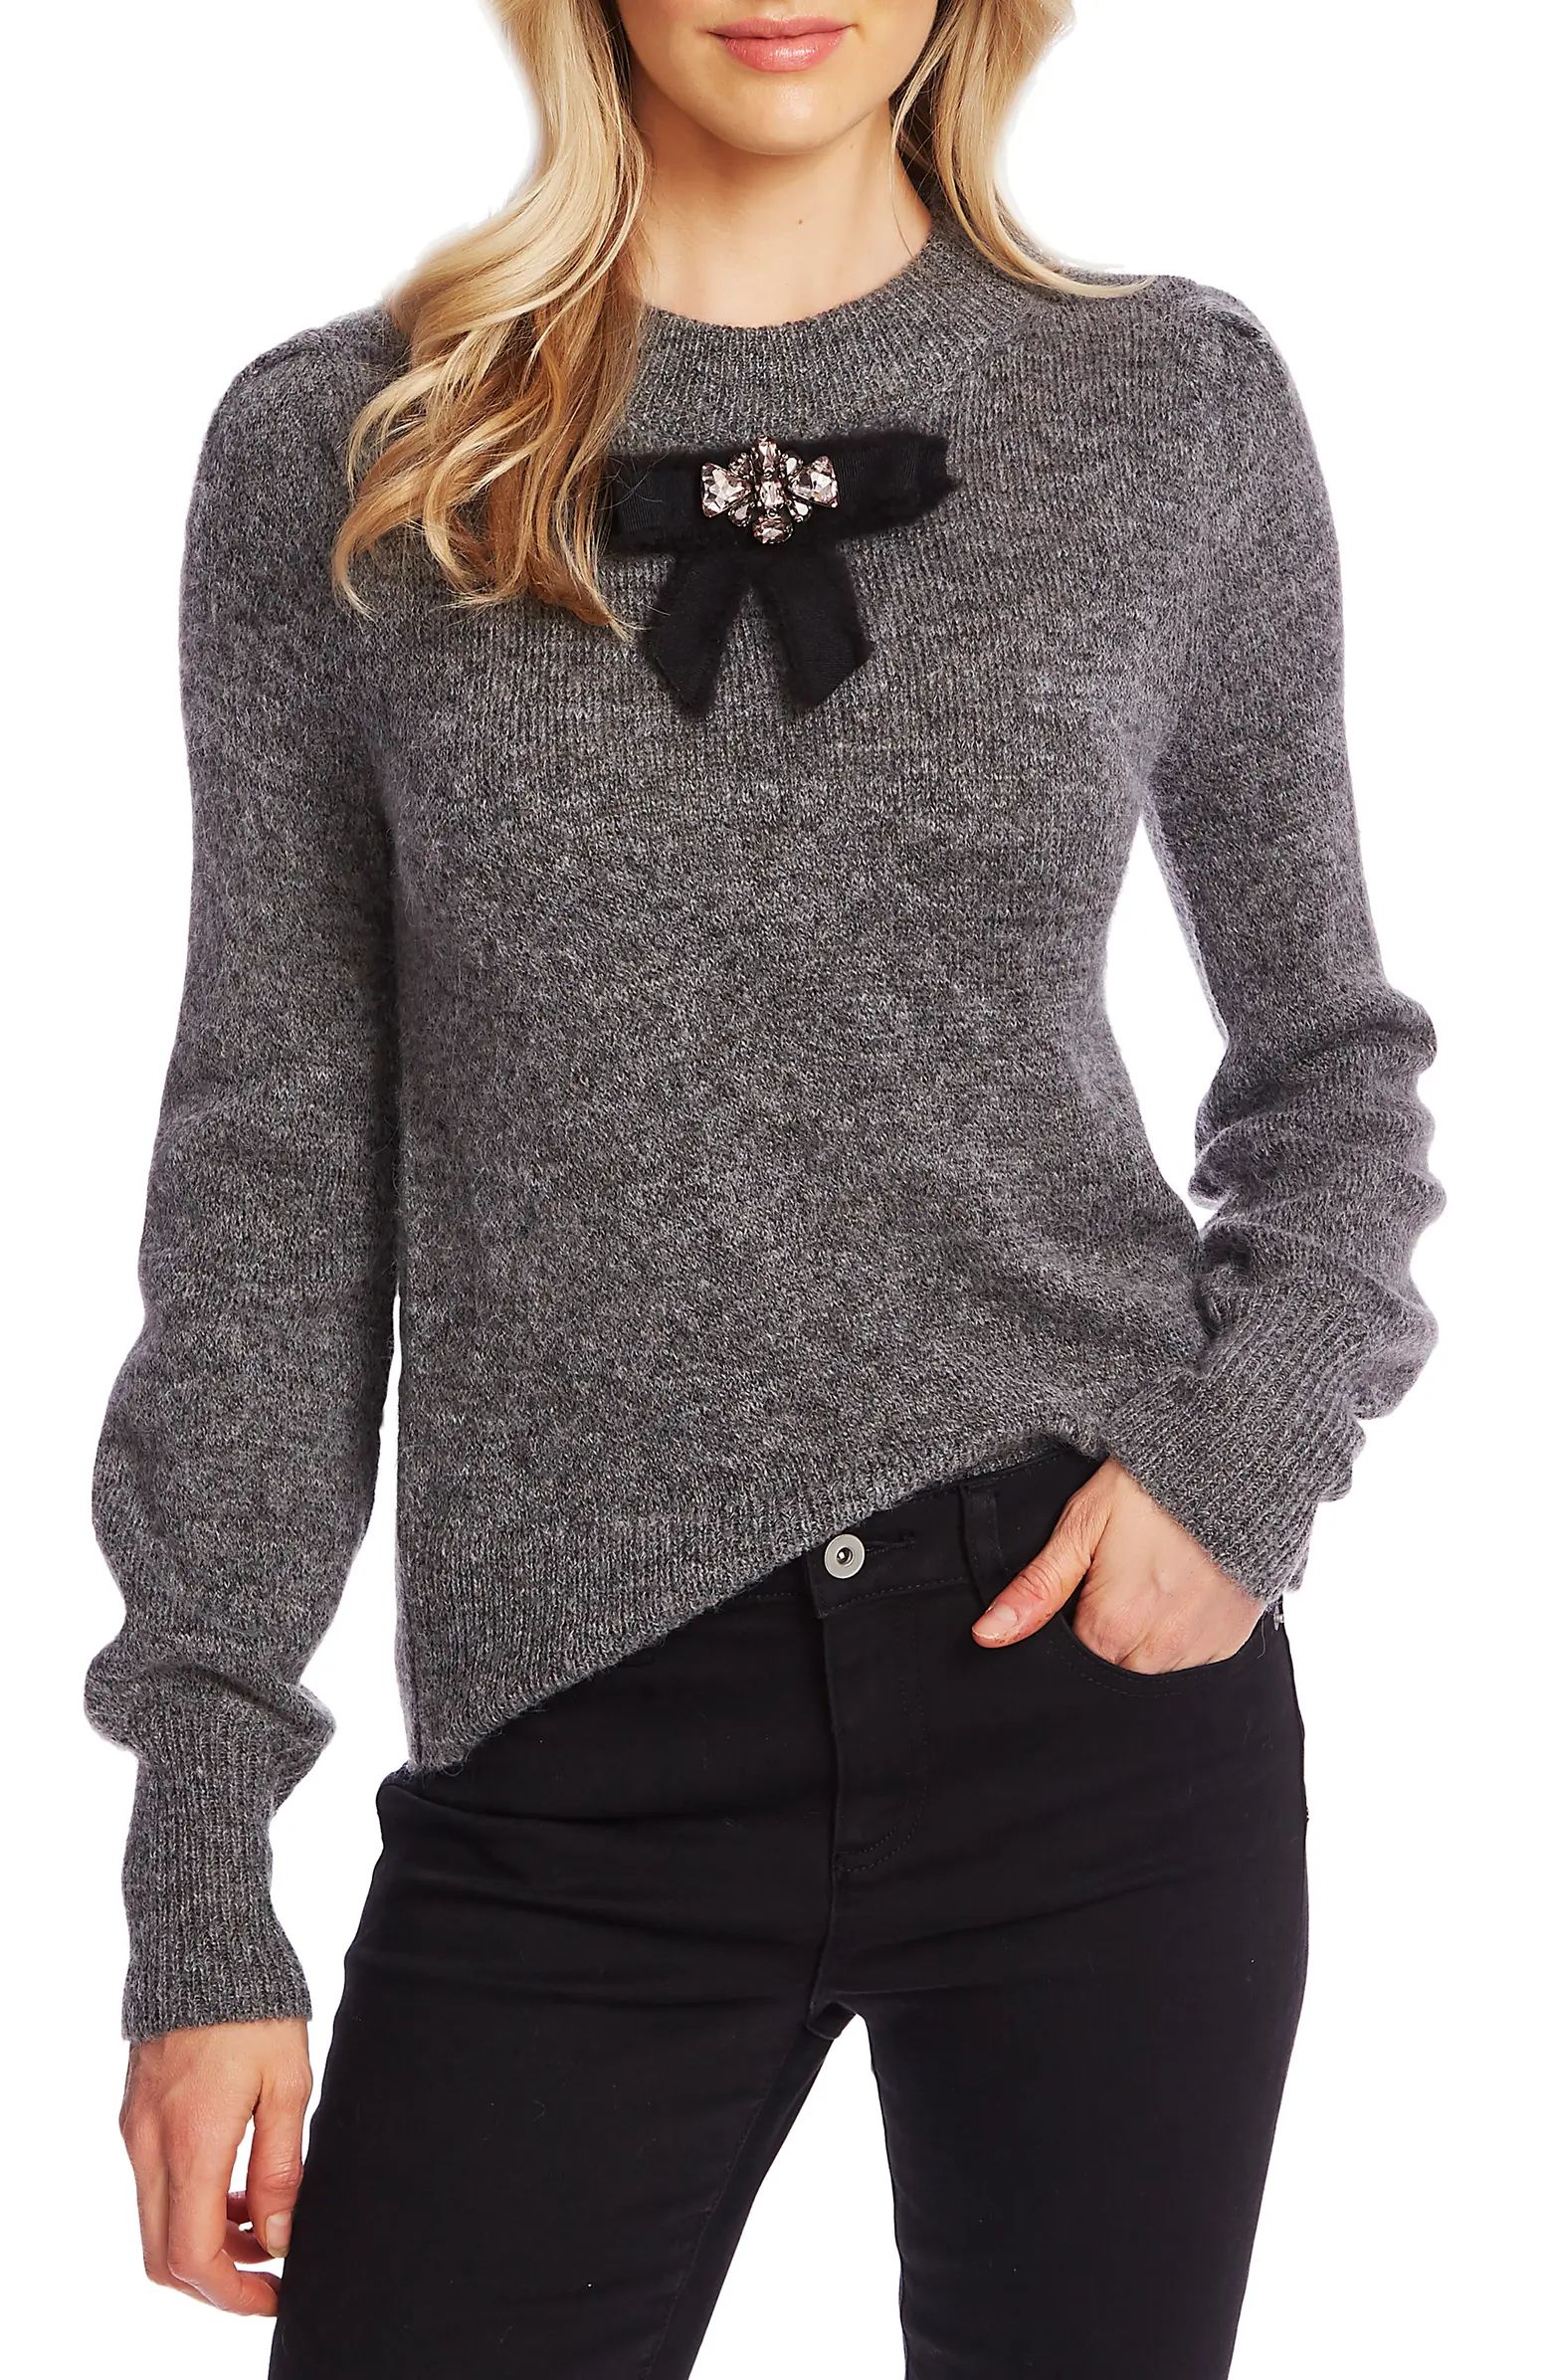 Jeweled Bow Detail Sweater | Nordstrom